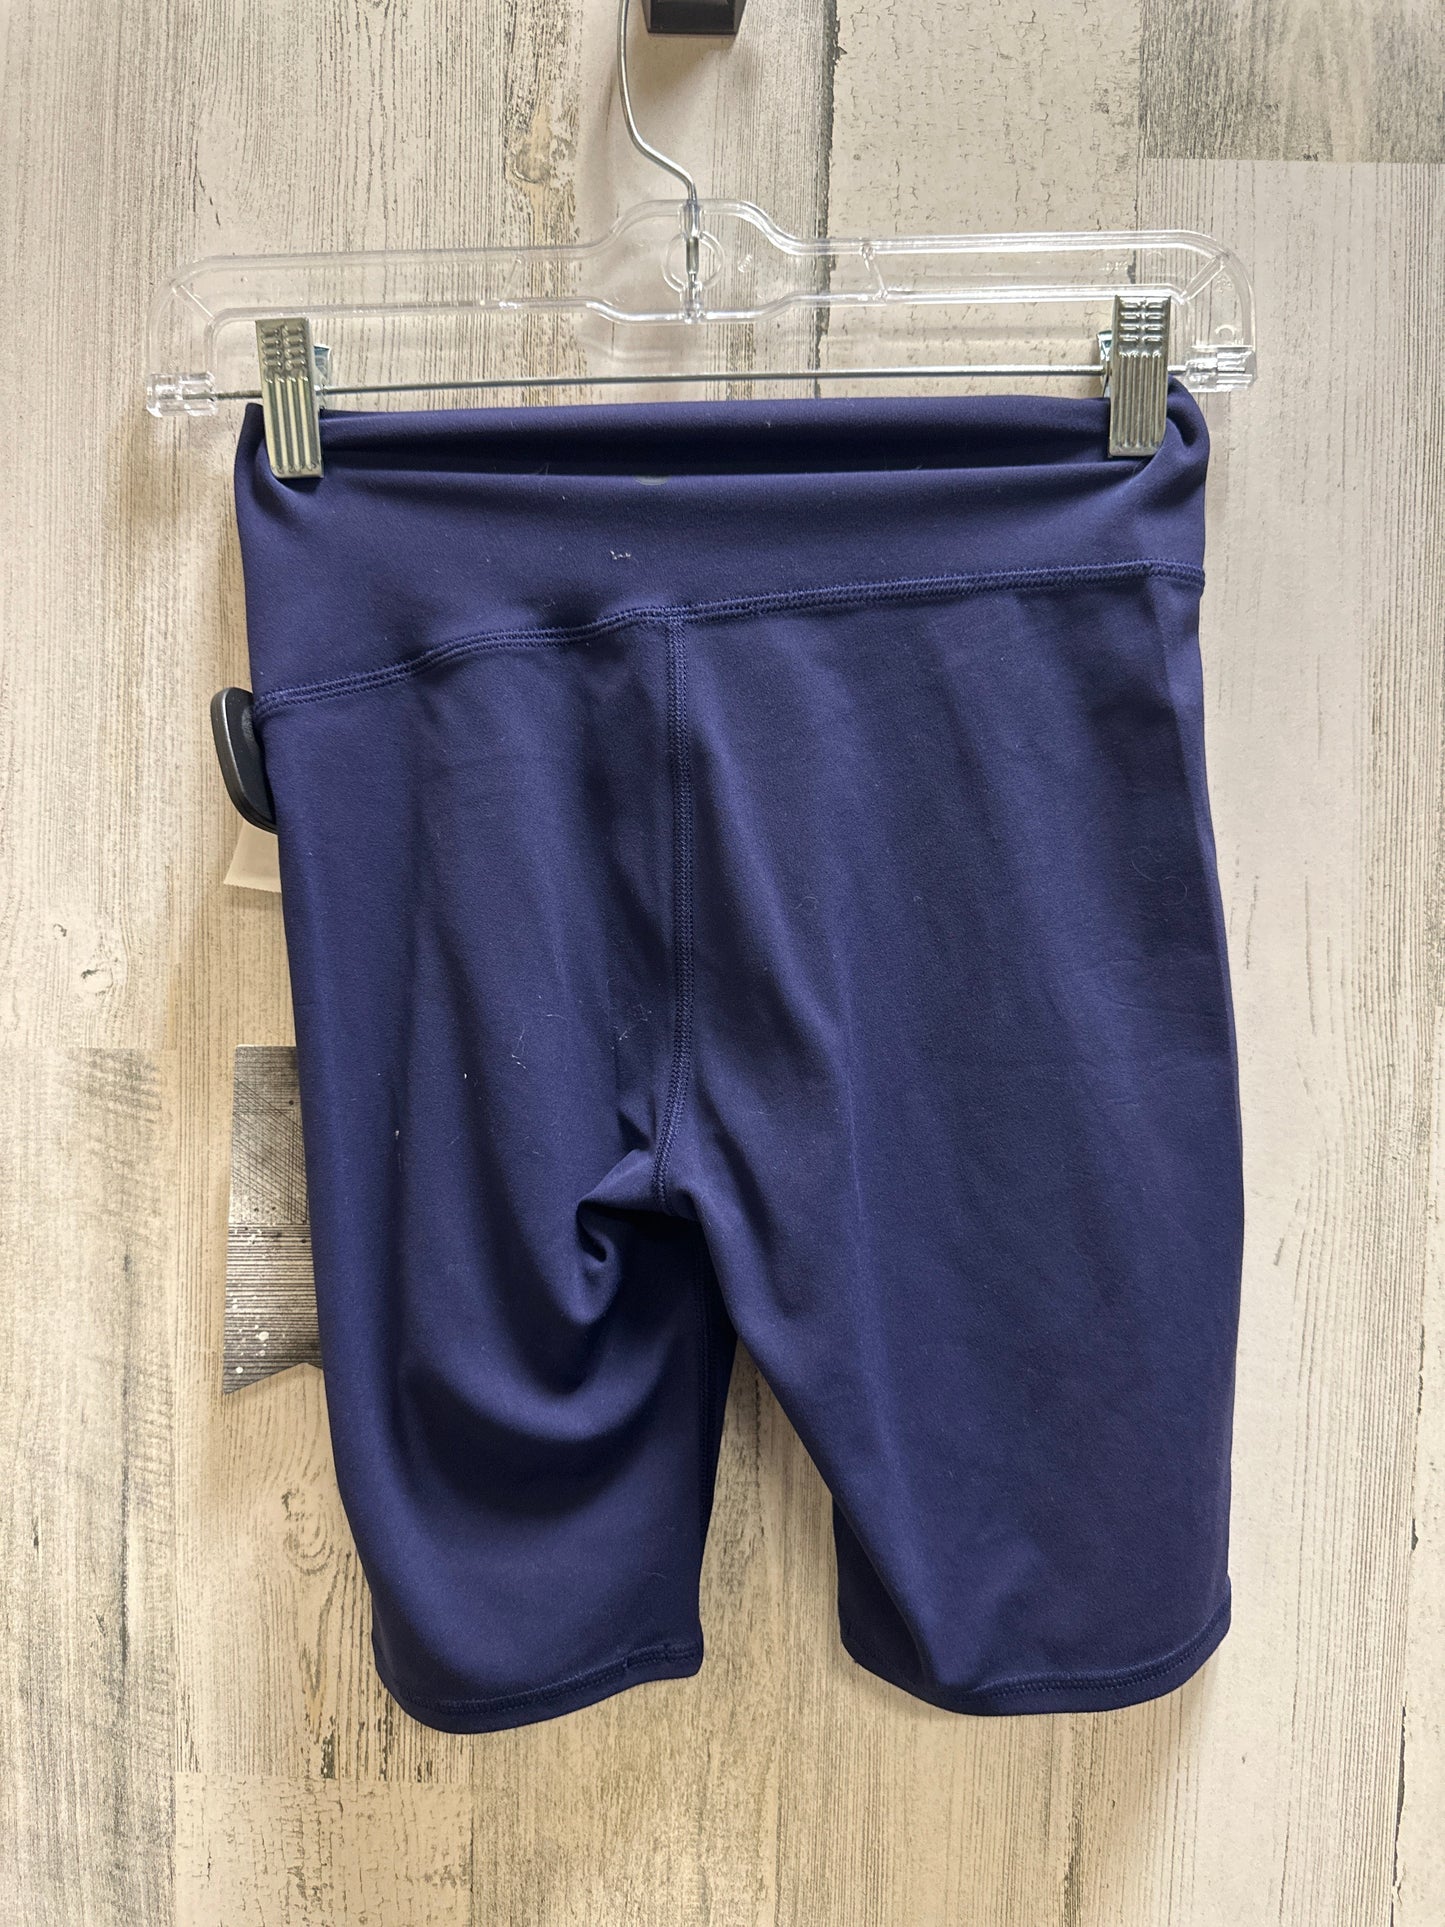 Blue Athletic Shorts Clothes Mentor, Size 6